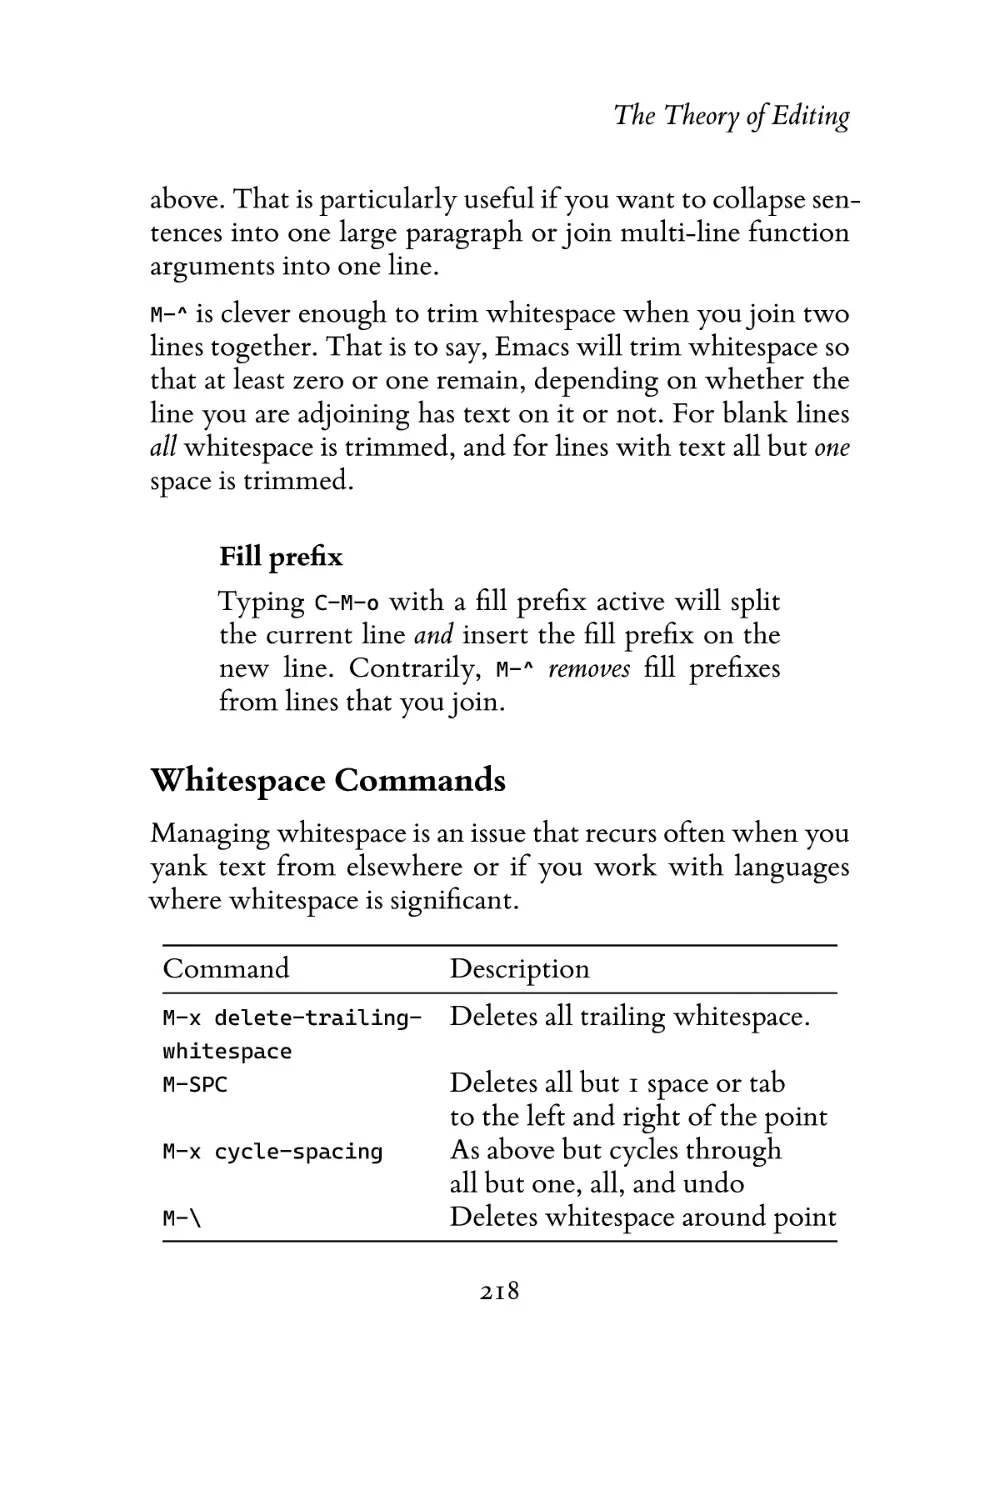 Whitespace Commands